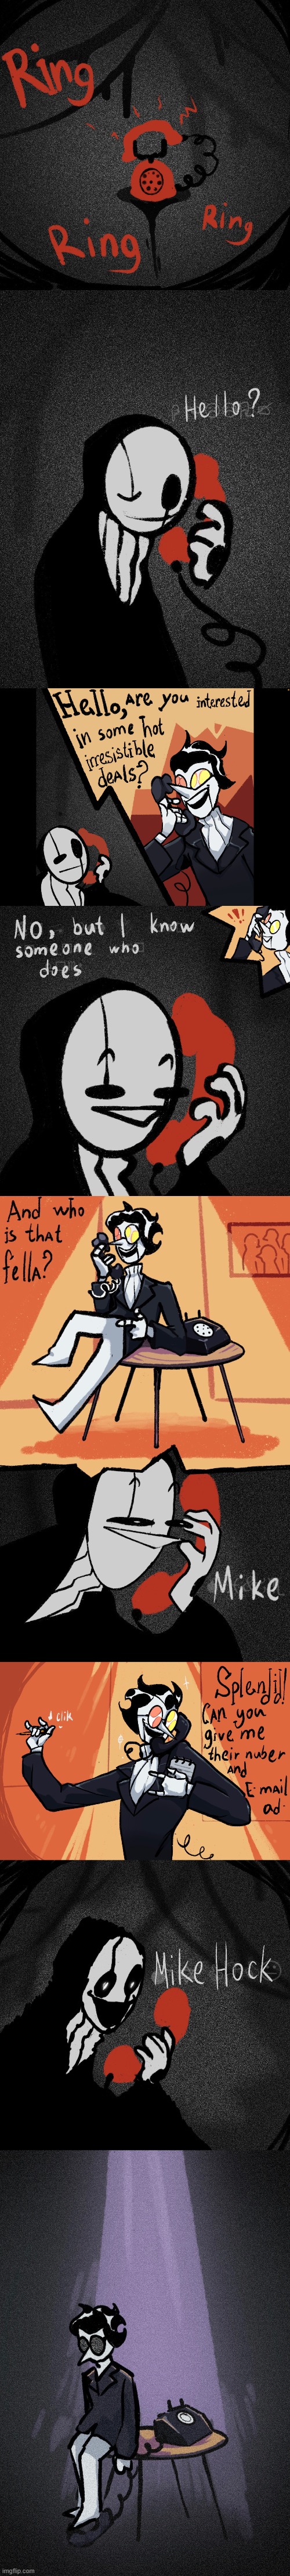 day 10 of posting undertale comics | image tagged in lmao,mike,spamton,gaster,lore,real | made w/ Imgflip meme maker